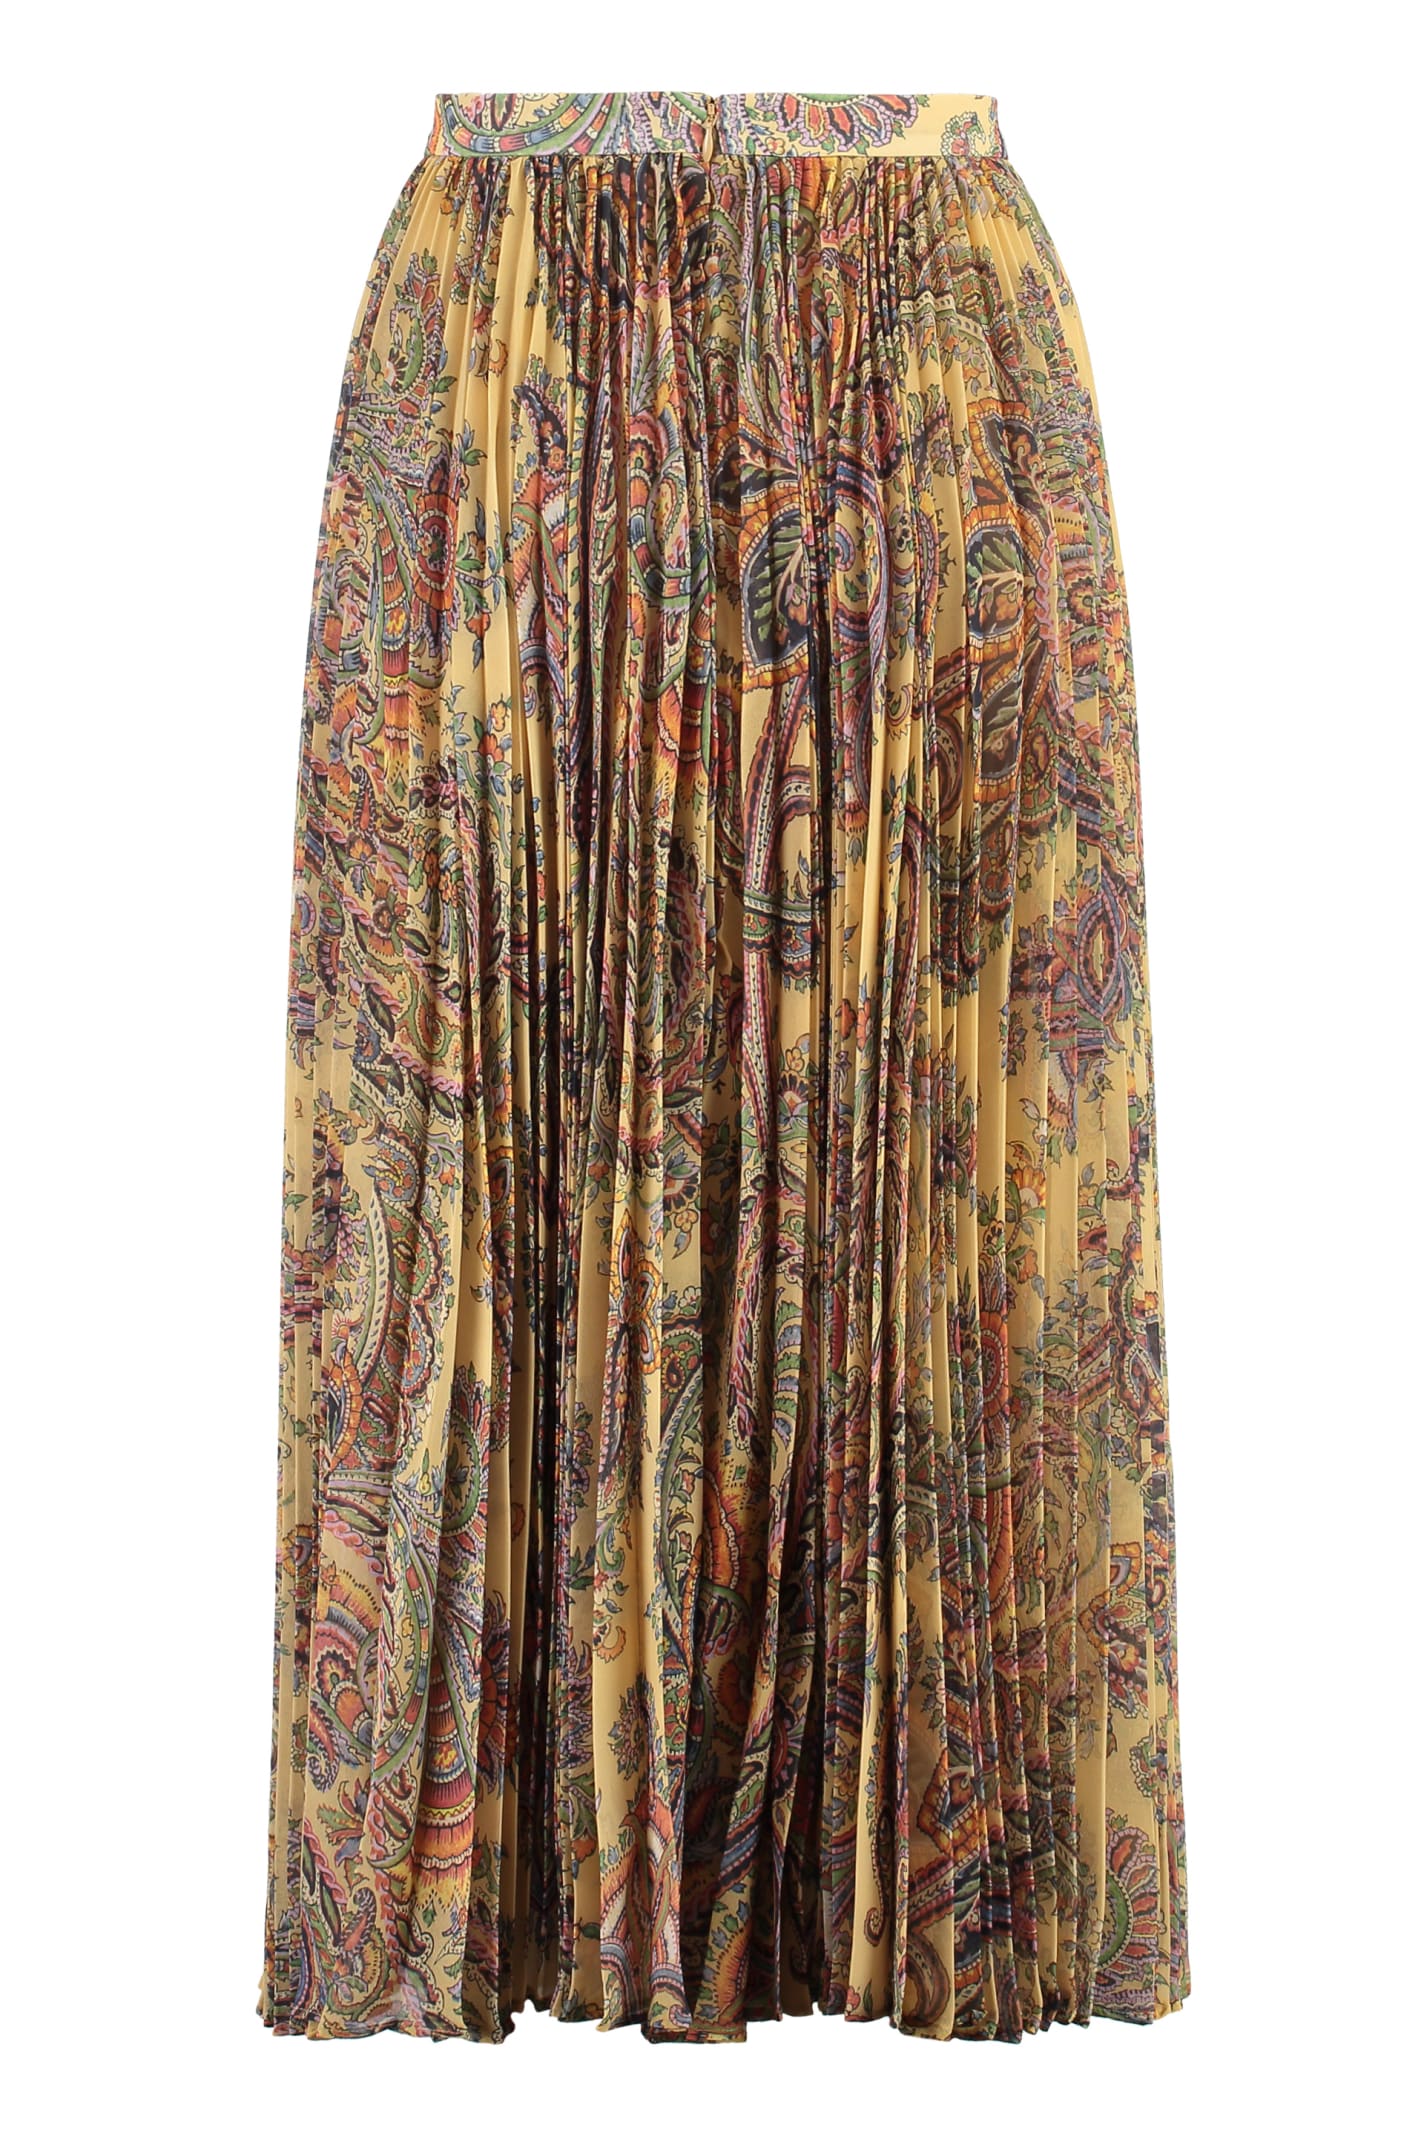 Shop Etro Printed Pleated Skirt